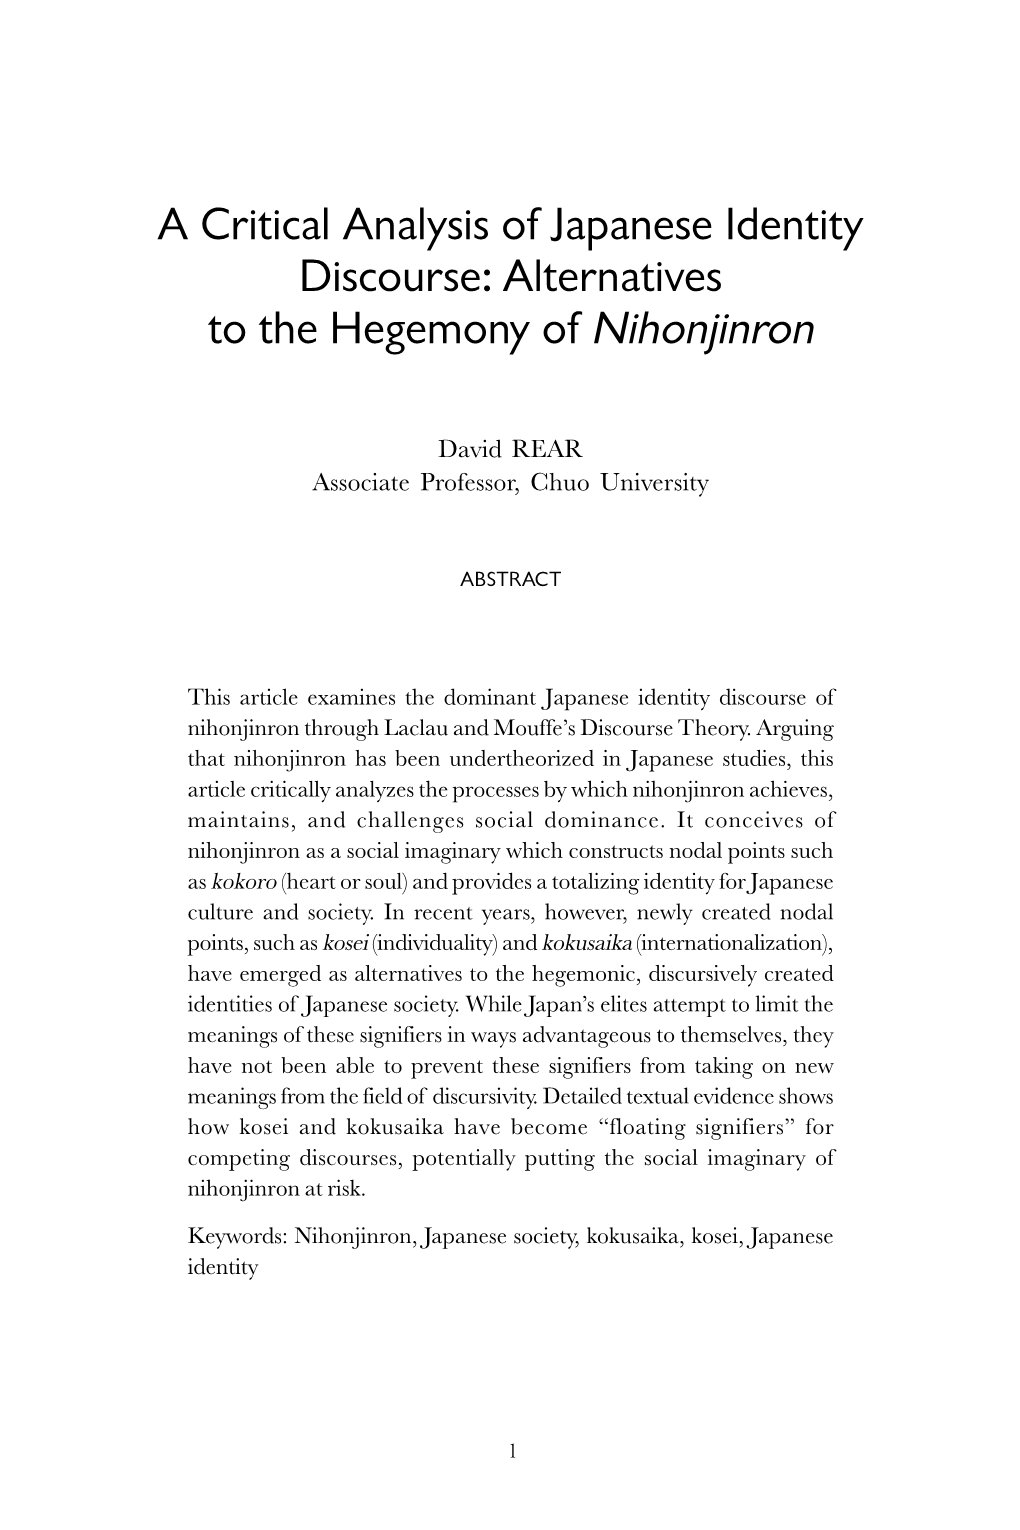 A Critical Analysis of Japanese Identity Discourse: Alternatives to the Hegemony of Nihonjinron